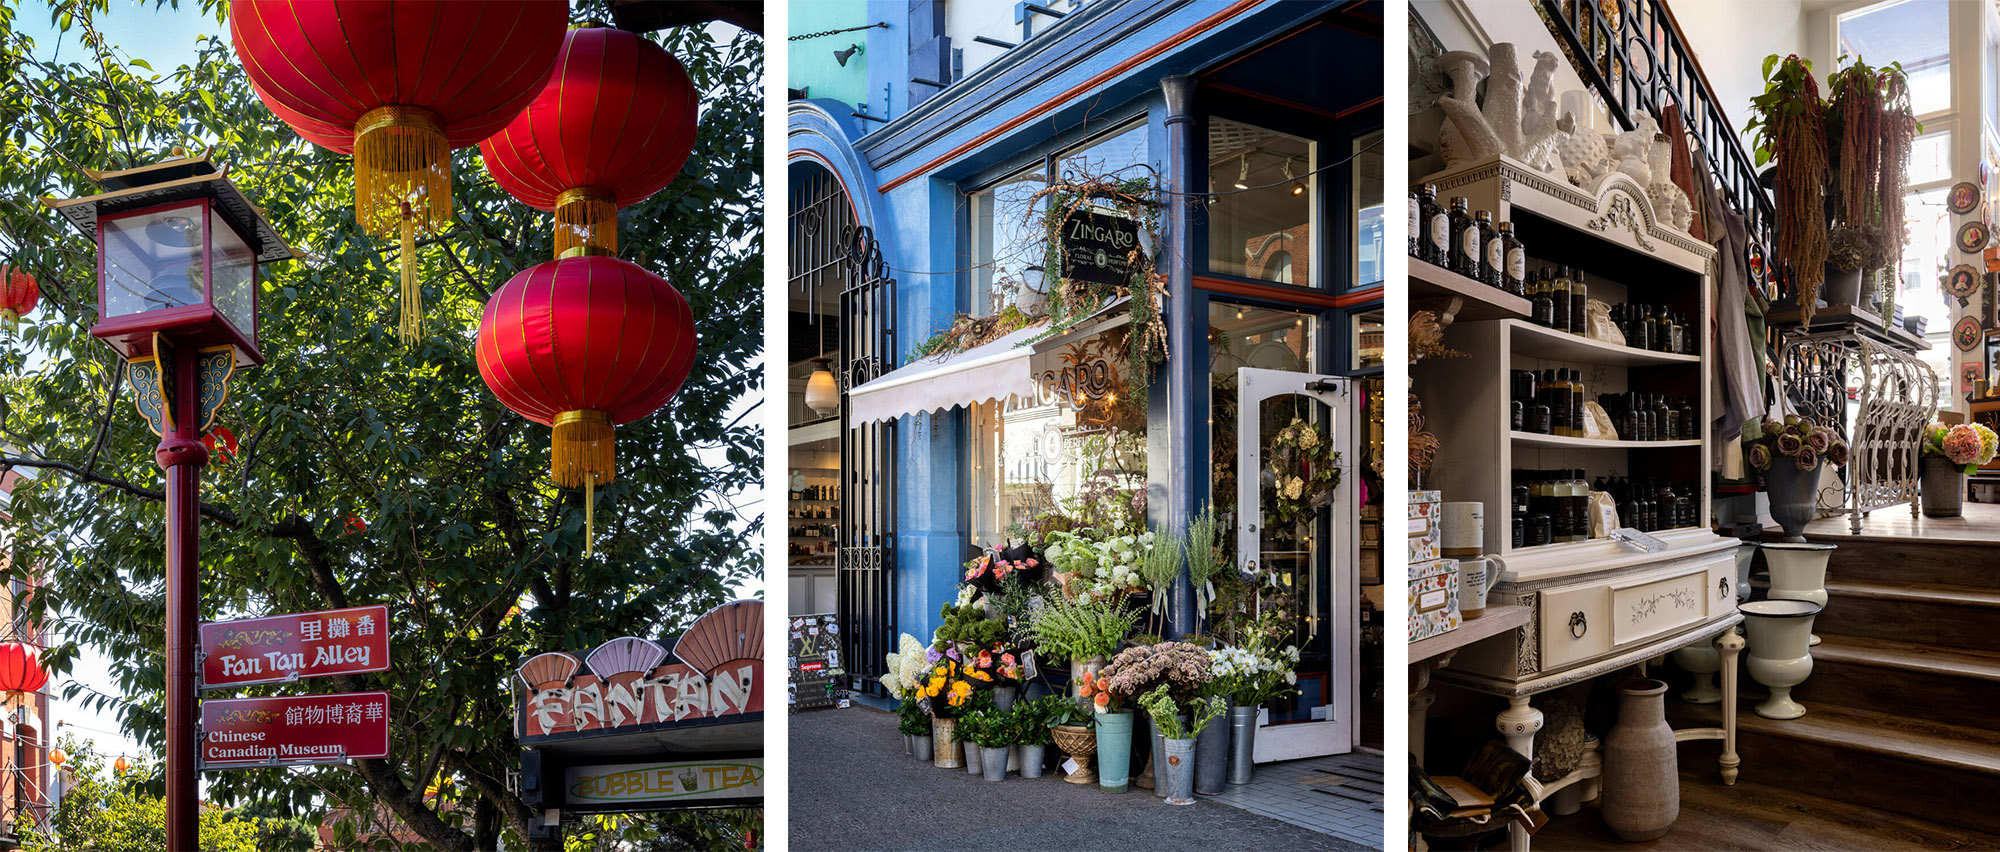 Specialty shops abound found in Victoria's historic China Town and Lower Johnson Street.